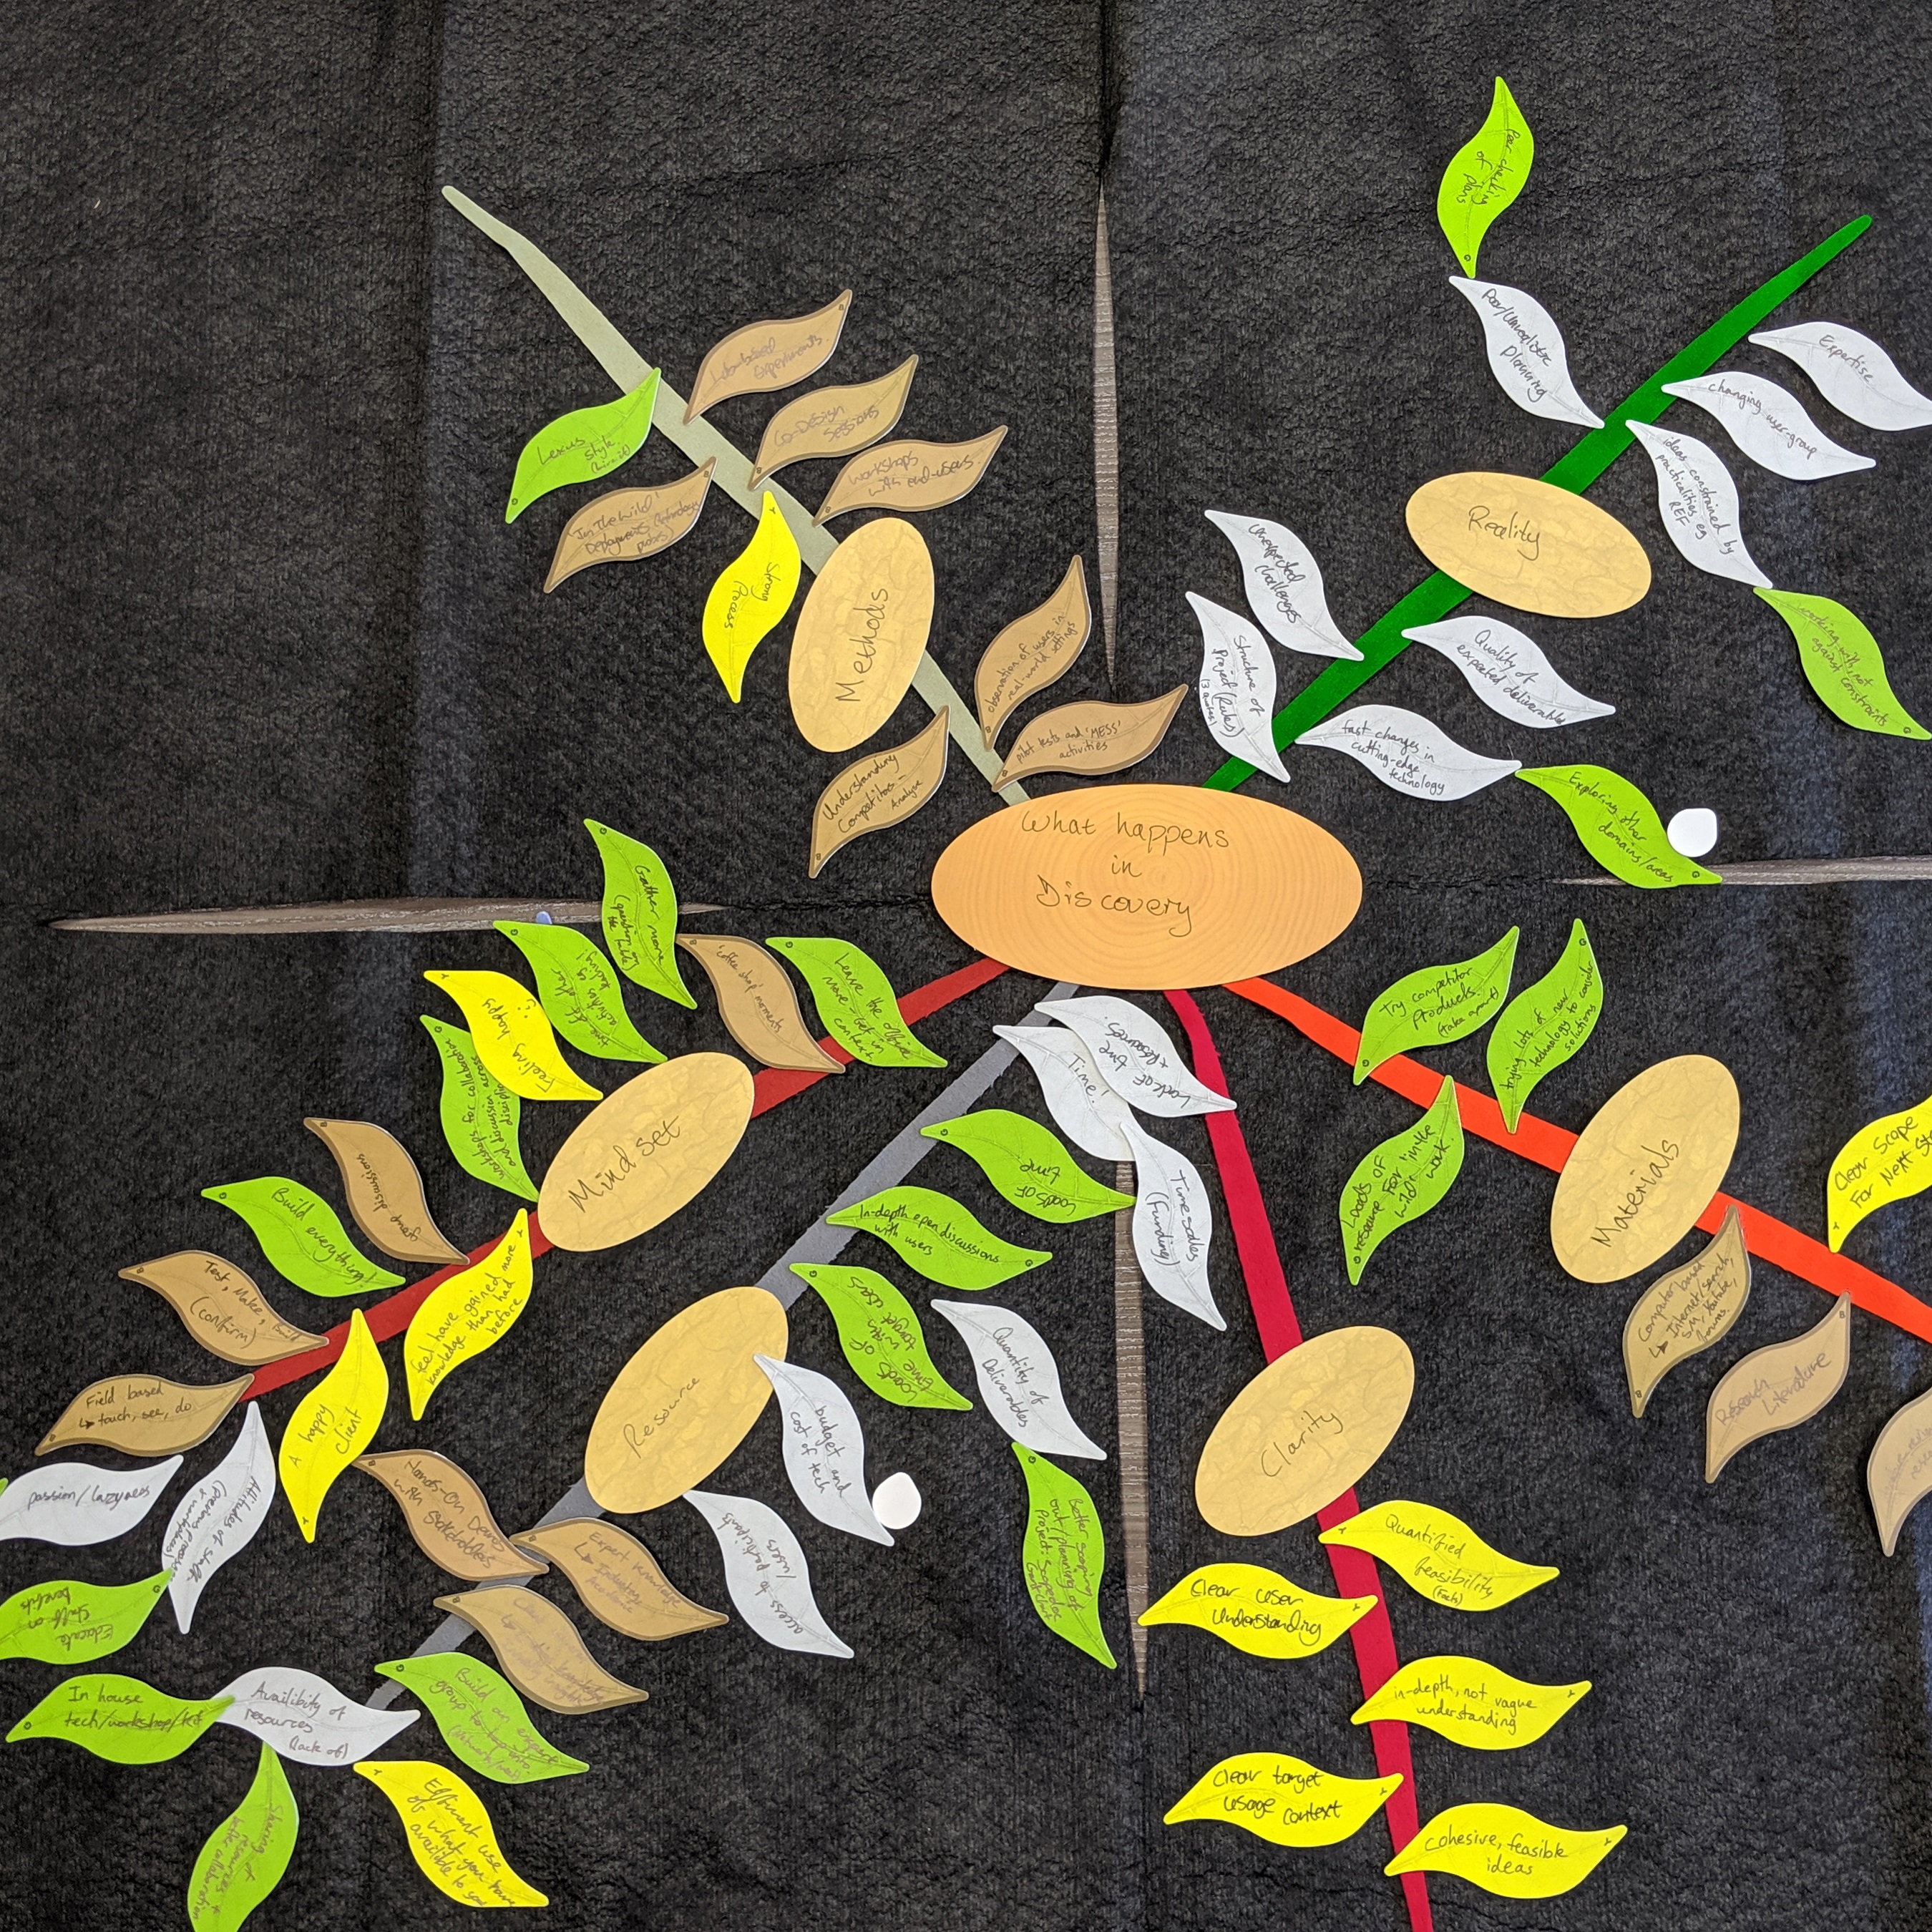 Photograph of a Ketso cloth after the UCLan pilot session, showing ideas grouped onto branches